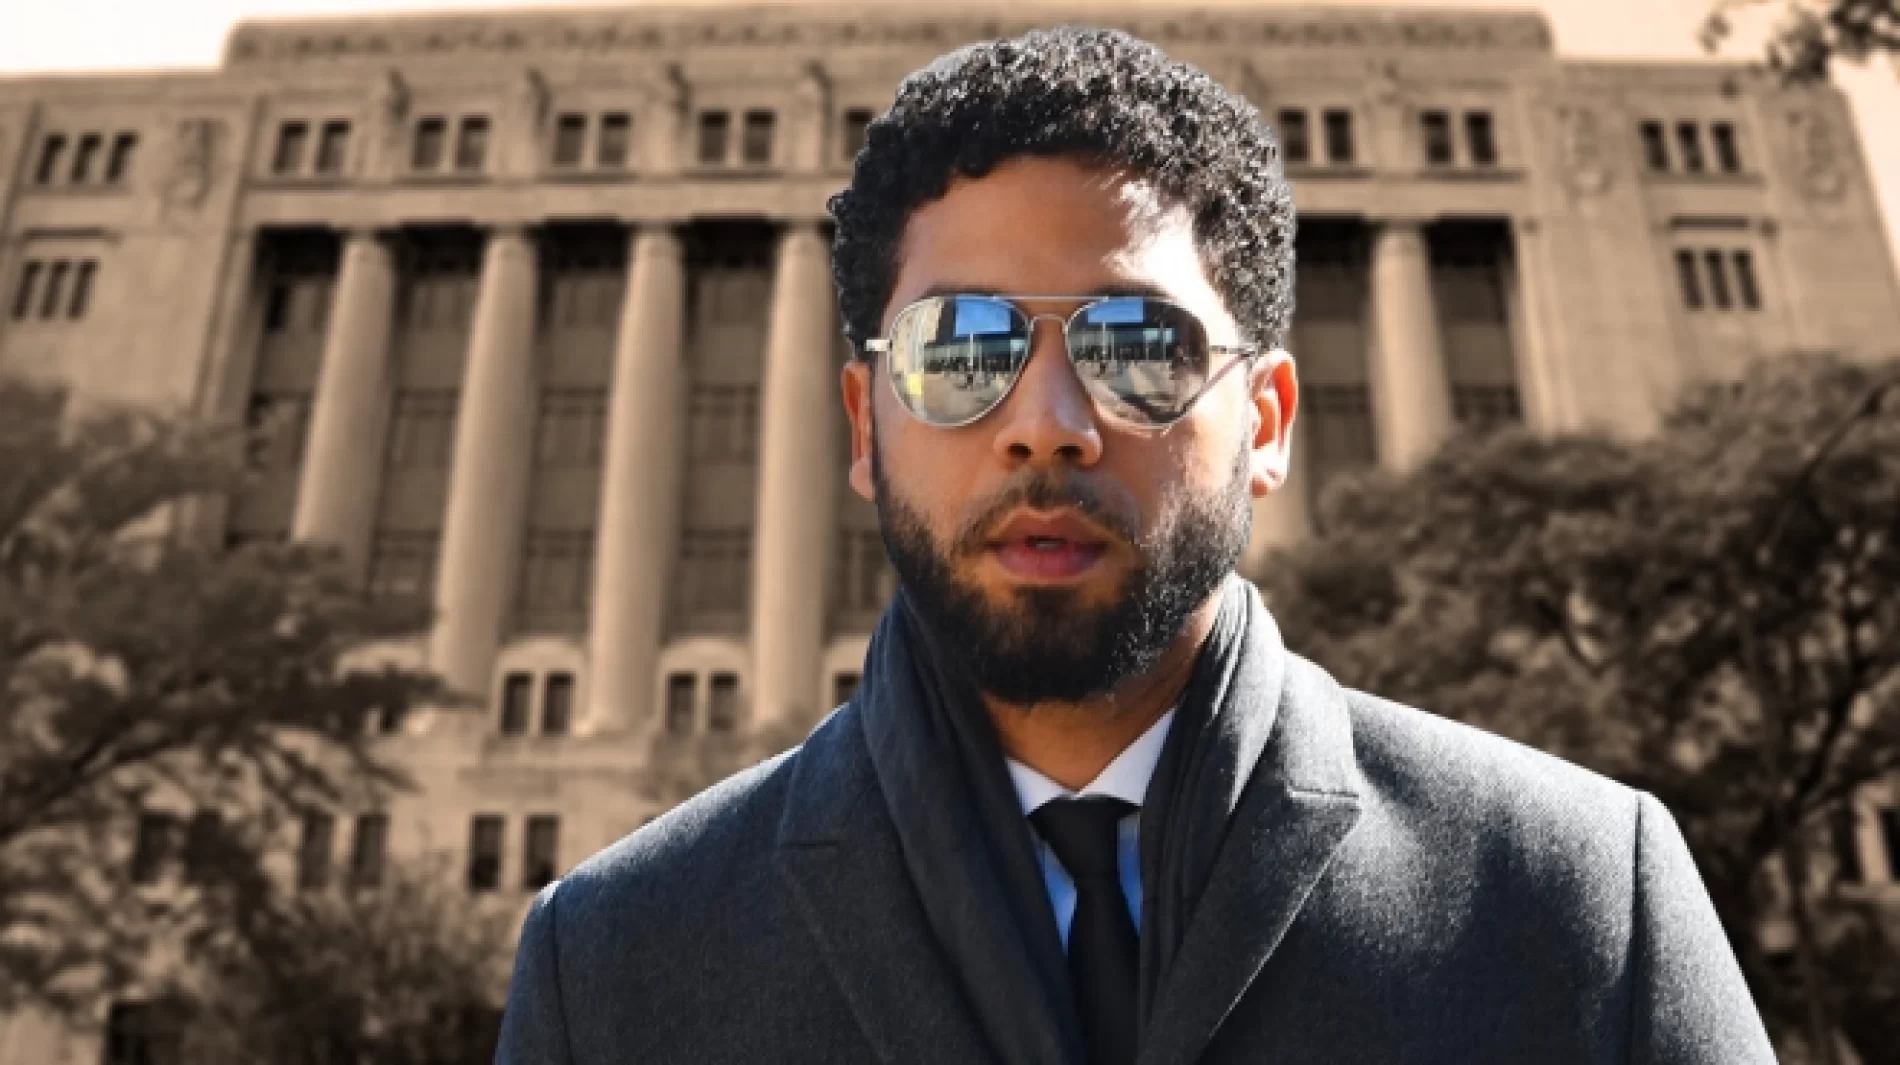 Jussie Smollett Sentenced To 150 Days In Jail Over Faked 2019 Attack